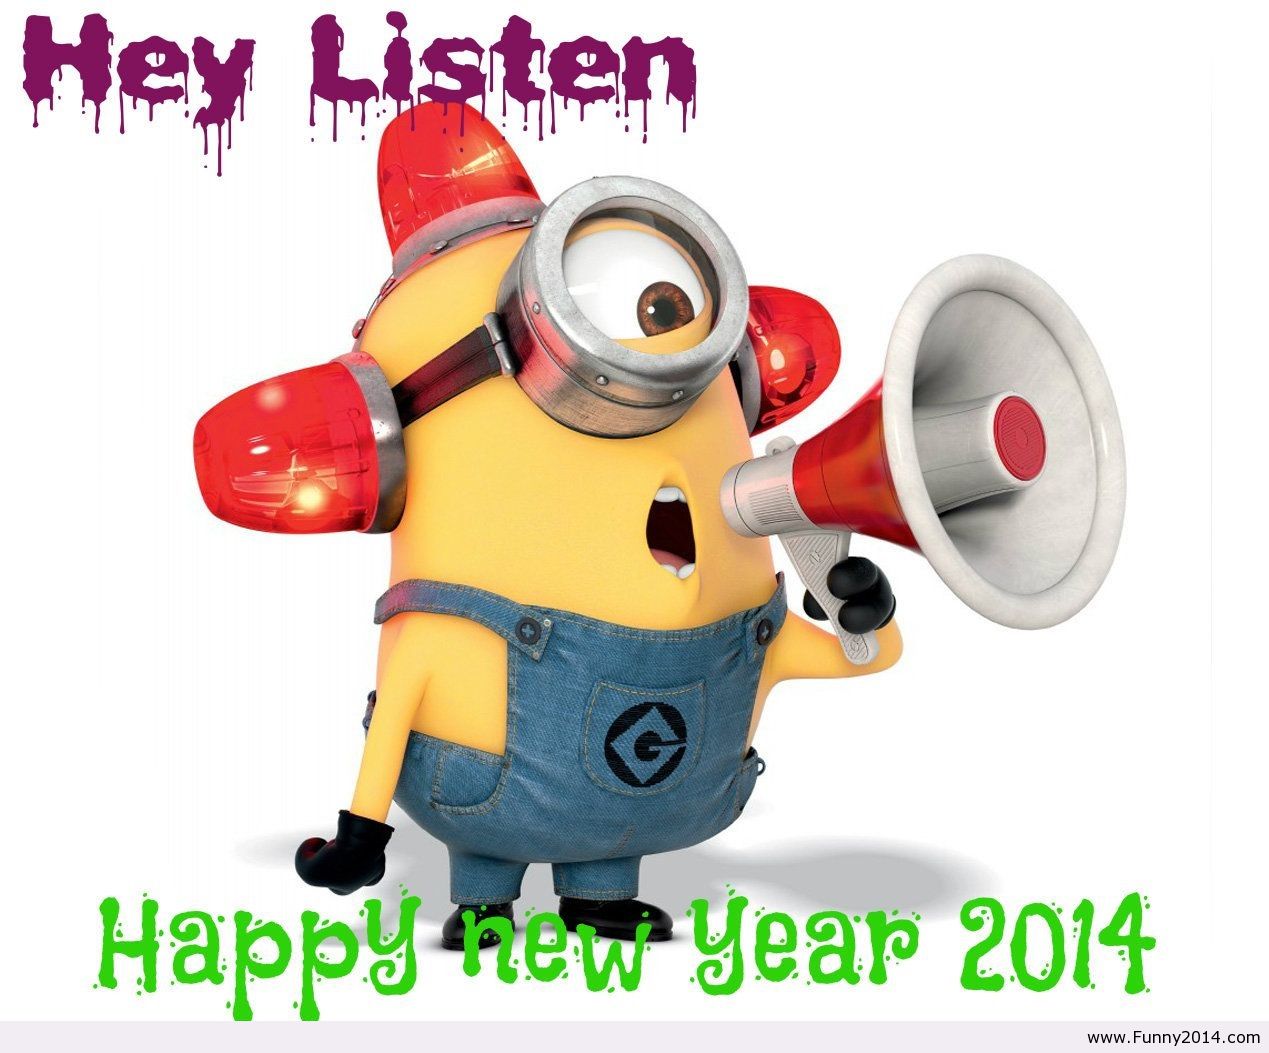 2014, Christmas, Funny Christmas - Happy New Year With Minions - 1269x1053  Wallpaper 